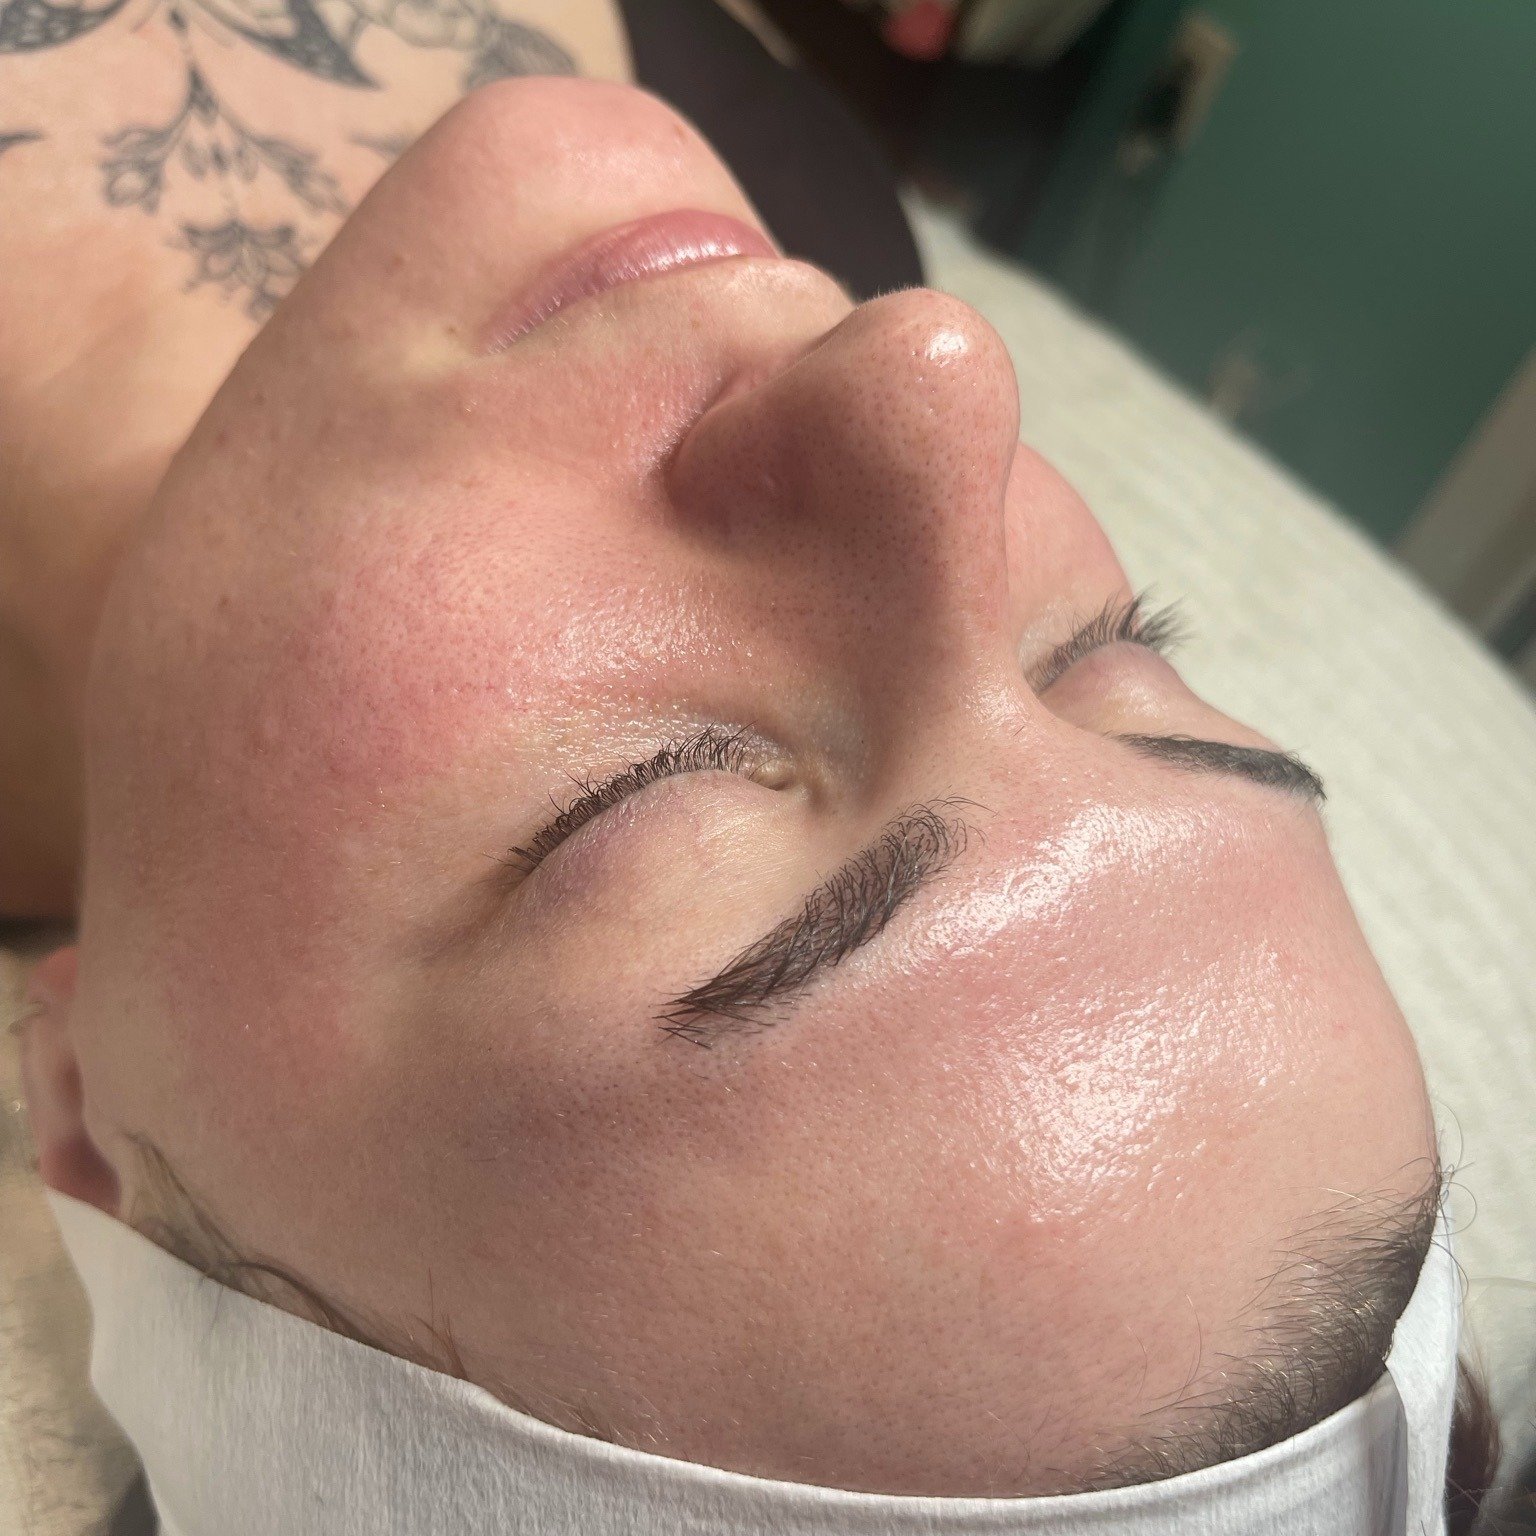 🌊Nothing beats that fresh, moisturized feeling you get after a rejuvenating @hydrafacial treatment! 

📅Book your next @hydrafacial with @beachsidebeauty_giselle  and @skinby.stephanie today!

@hydrafacial_laura 

#destinspa #destinhydrafacial #dest